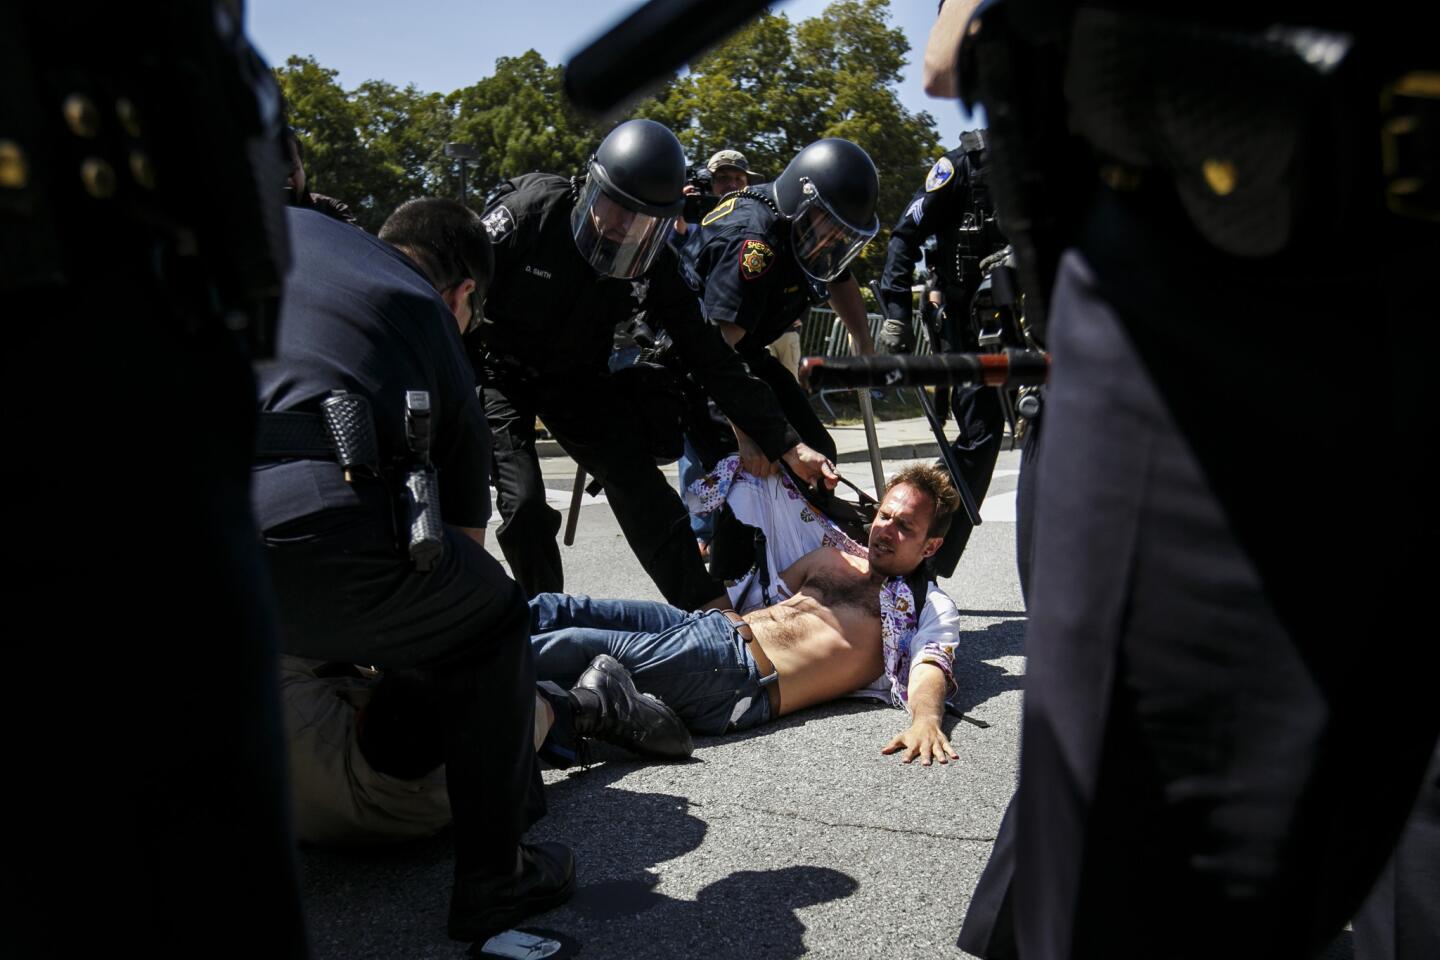 Protesters clash with police outside the hotel in Burlingame where Donald Trump spoke at the California Republican Party convention on April 29, 2016.